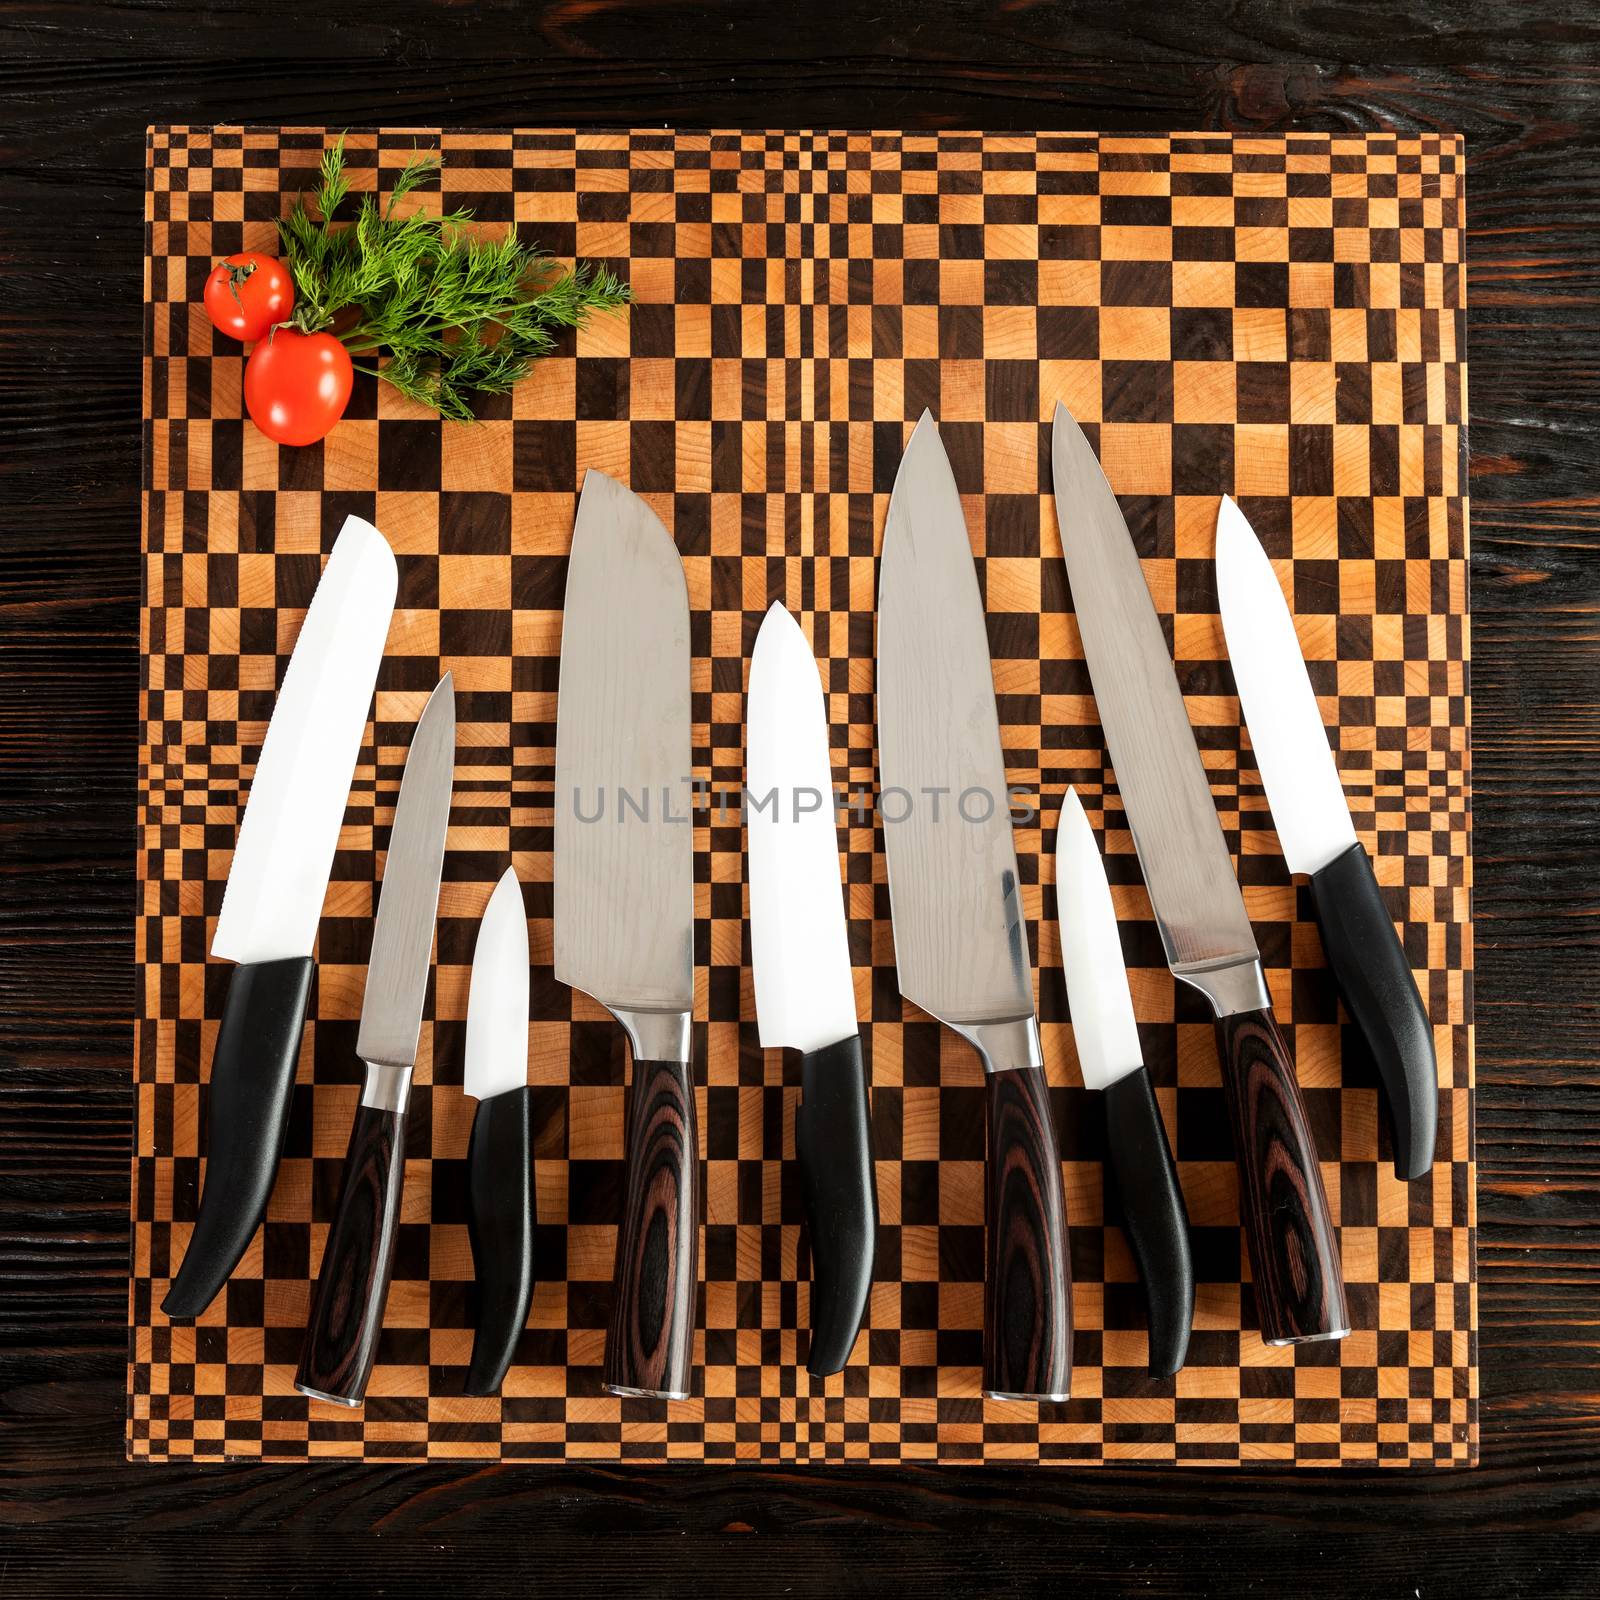 A set of high quality kitchen knives on a cutting board by sveter